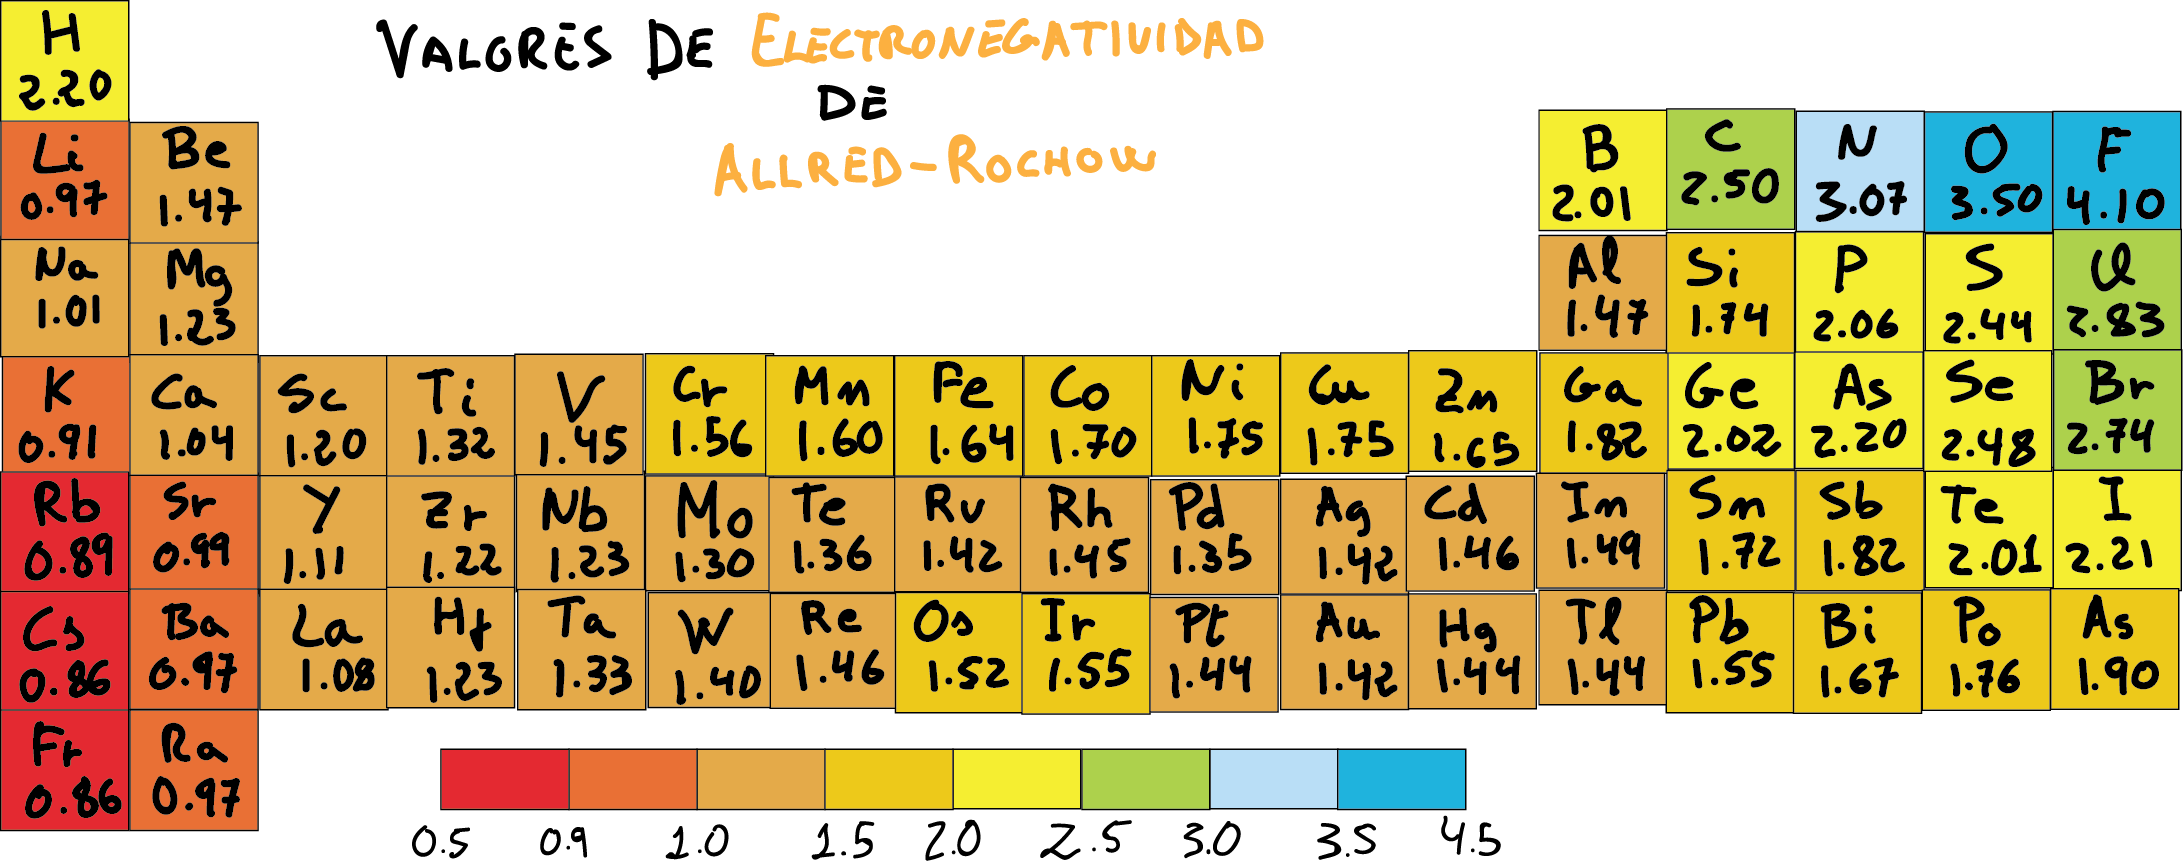 Table of electronegativity of Allred-Rochow in the Periodic Table